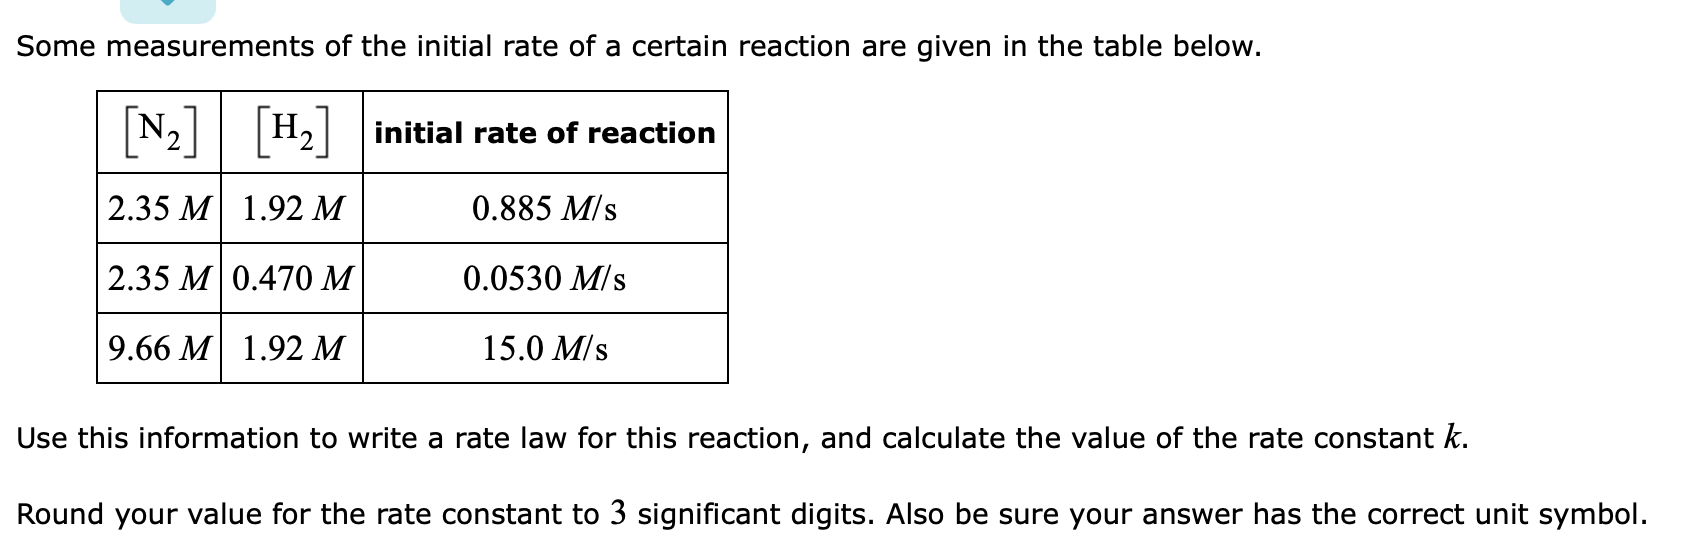 Some measurements of the initial rate of a certain reaction are given in the table below.
Н.
[N2]
initial rate of reaction
H2
2.35 M
0.885 M/s
1.92 м
2.35 M
0.0530 M/s
0.470 M
9.66 M
1.92 M
15.0 M/s
Use this information to write a rate law for this reaction, and calculate the value of the rate constant k.
Round your value for the rate constant to 3 significant digits. Also be sure your answer has the correct unit symbol.
